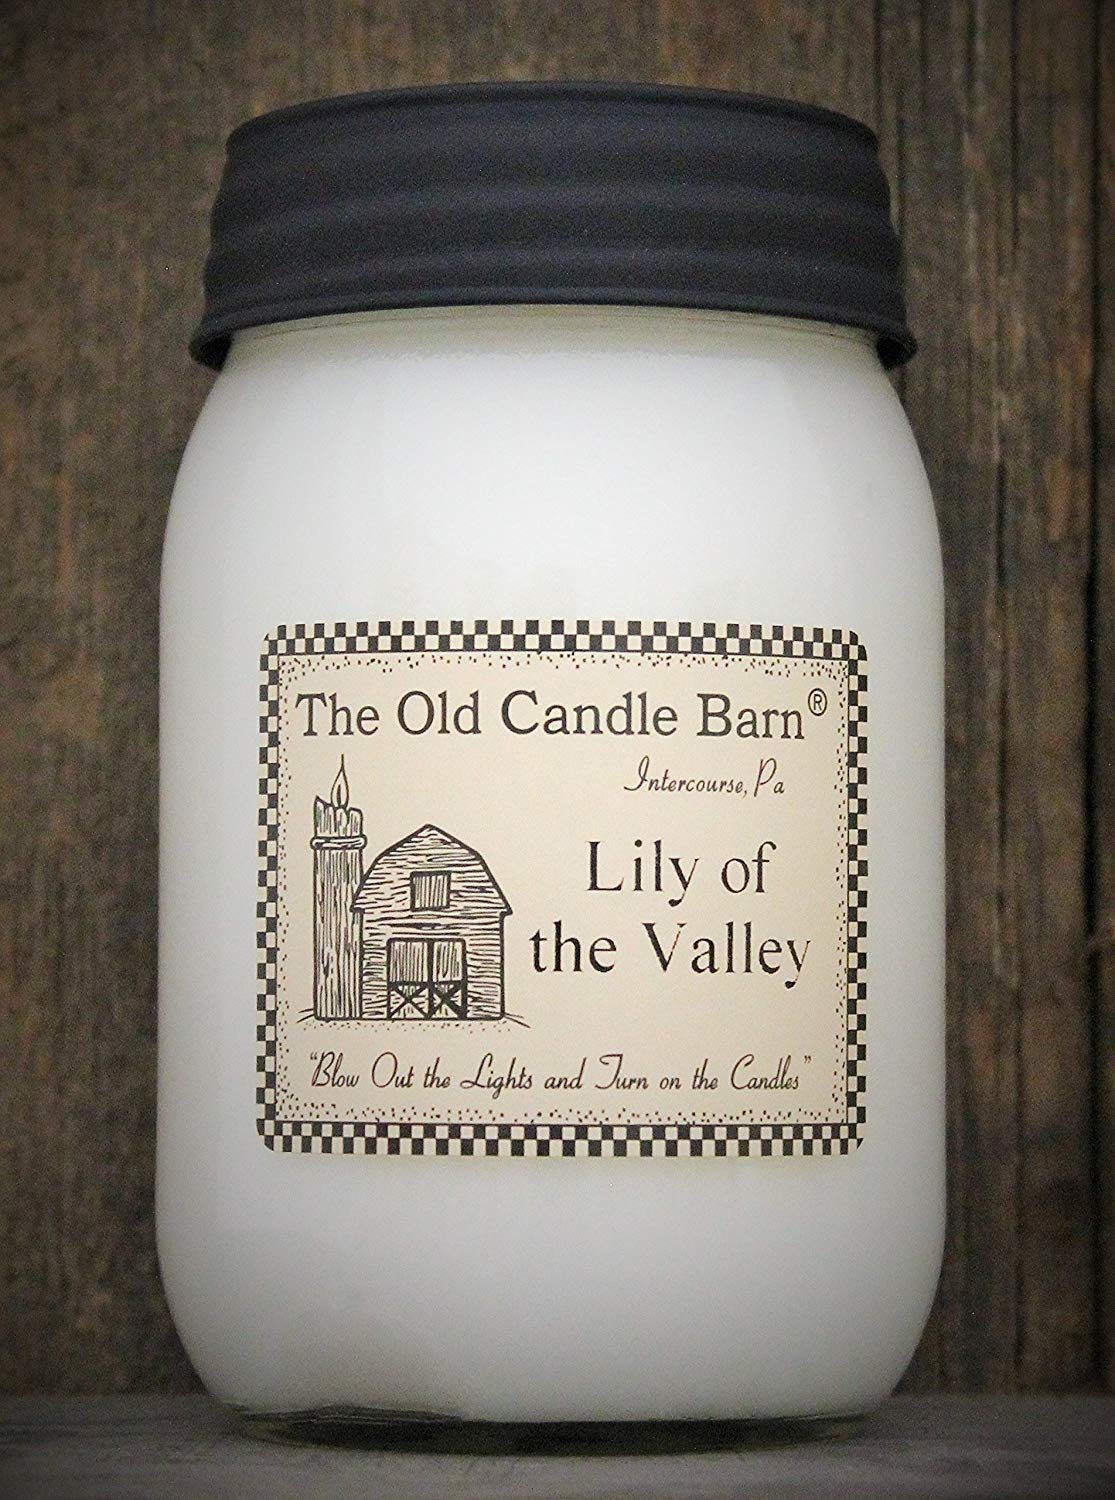 The Old Candle Barn Lily Of The Valley 16 Oz Jar Candle